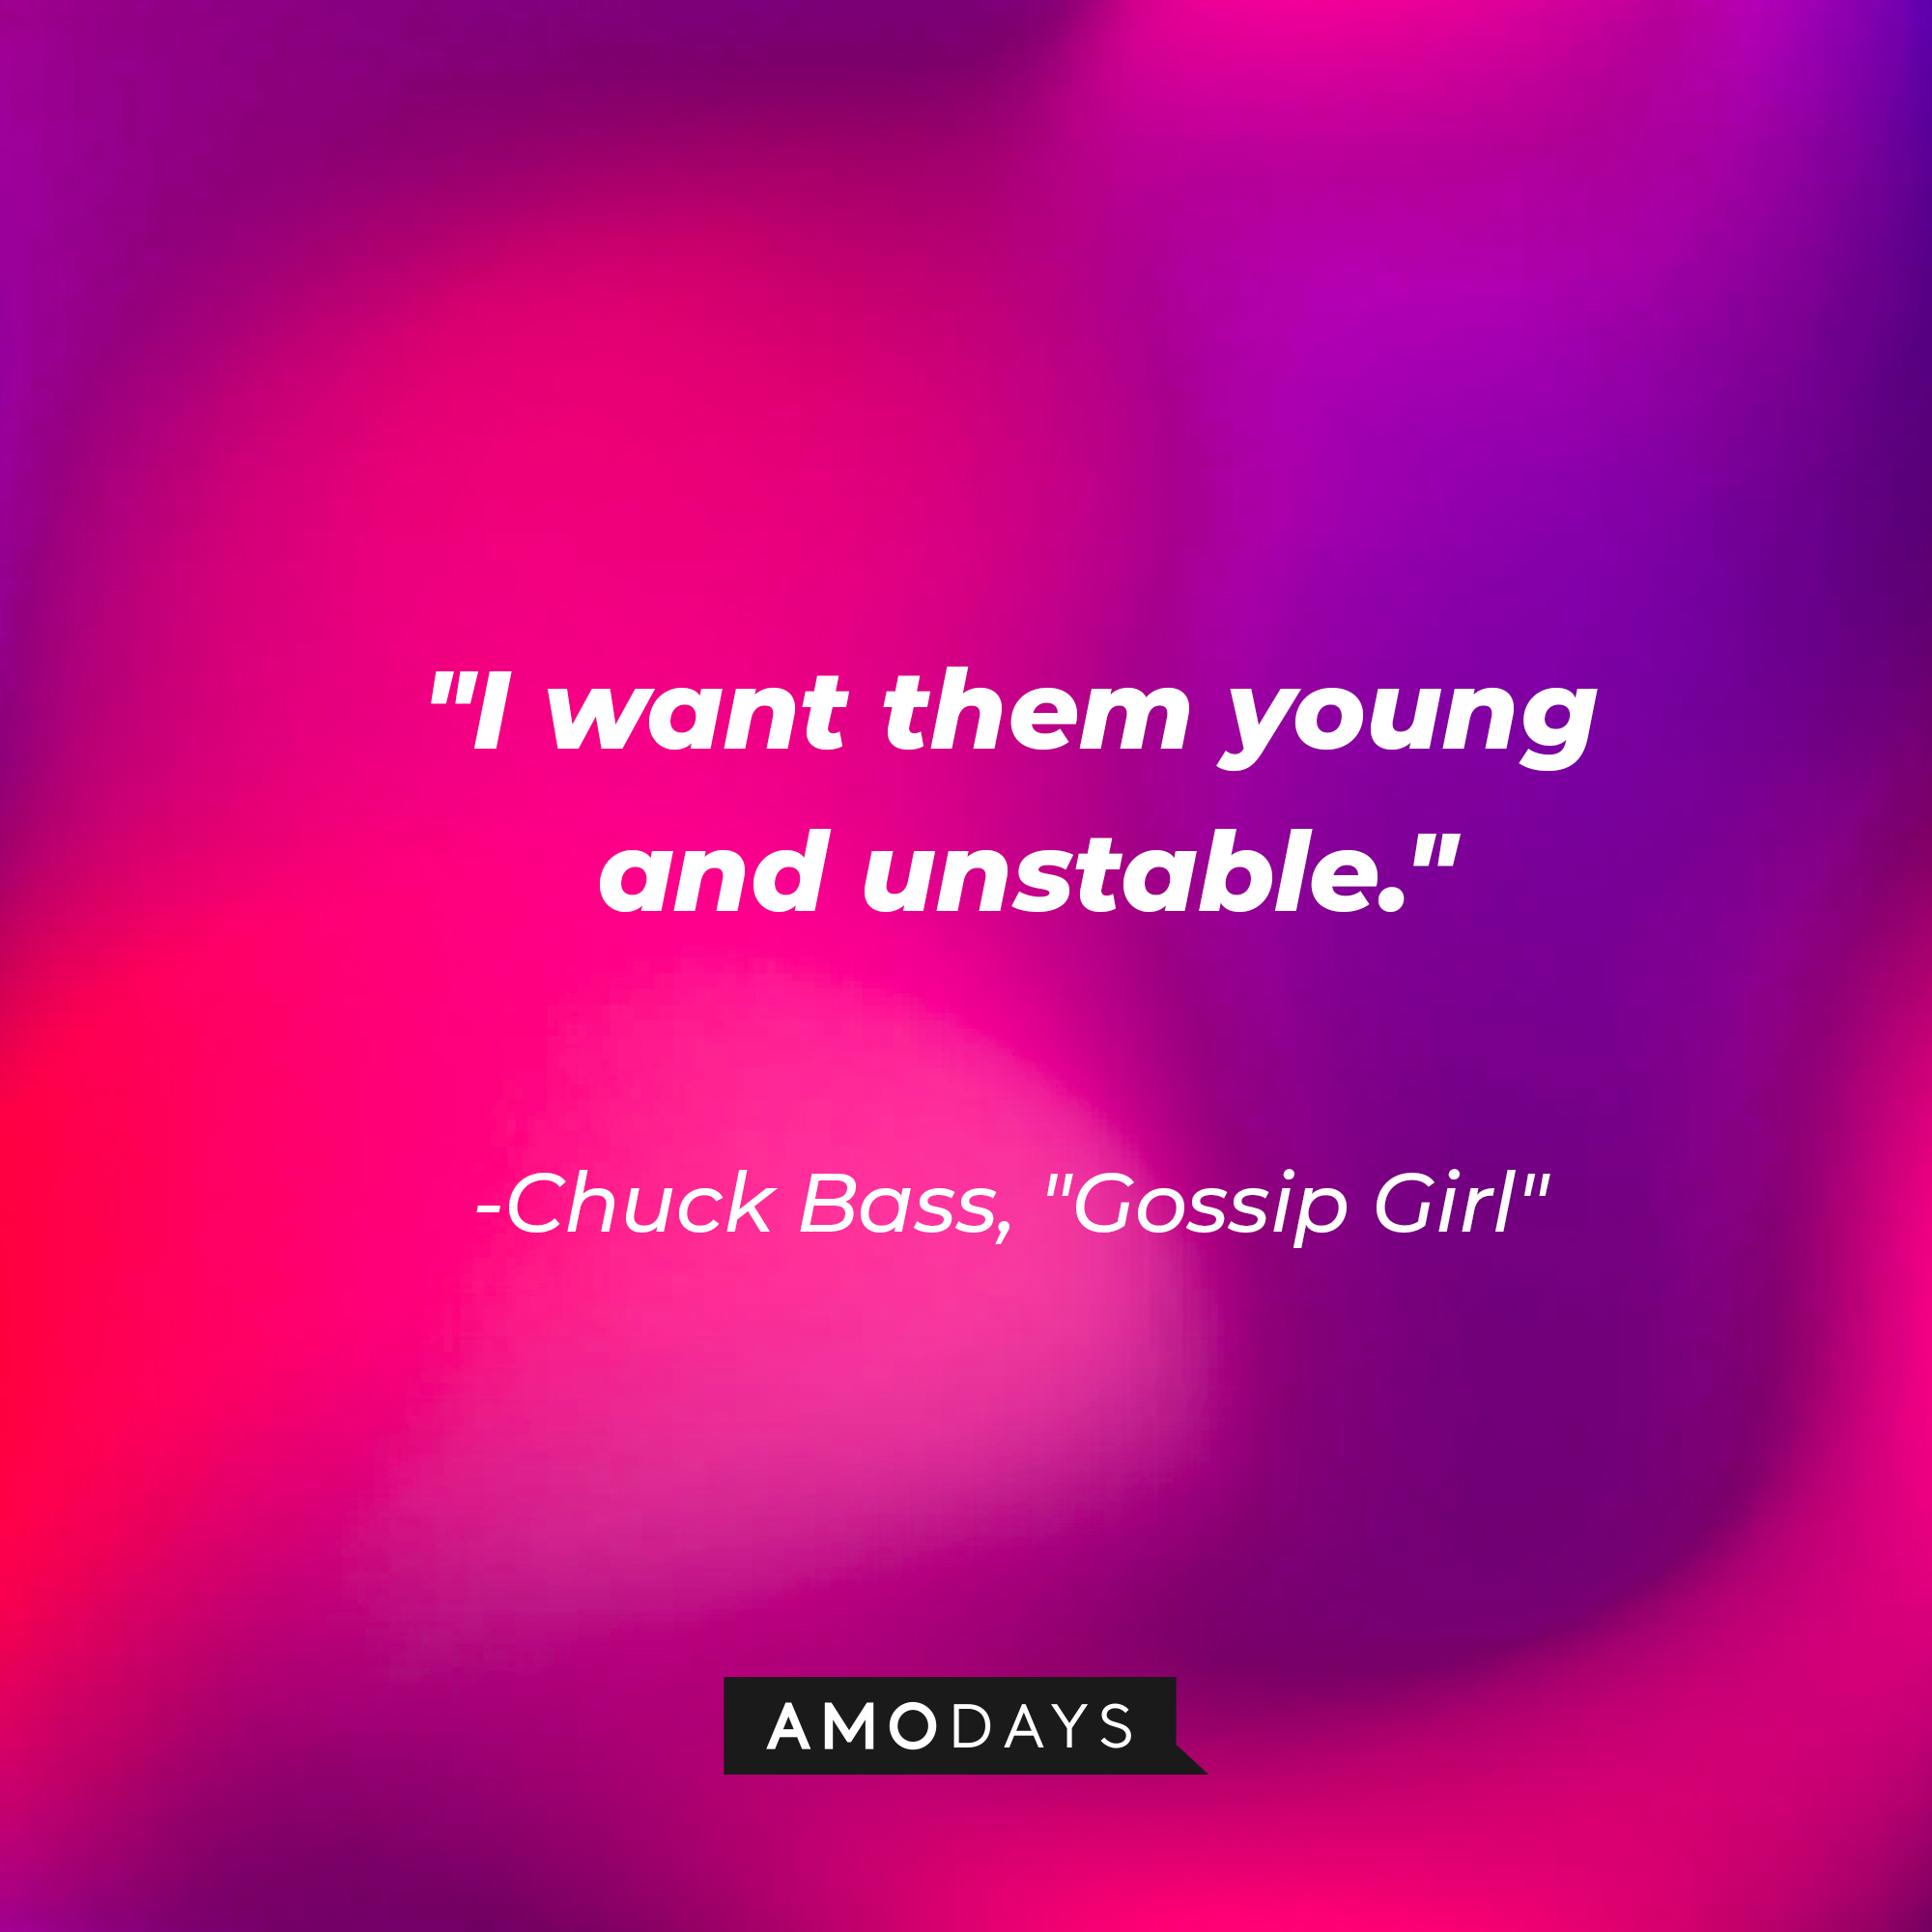 Chuck Bass' quote: "I want them young and unstable." | Source: AmoDays